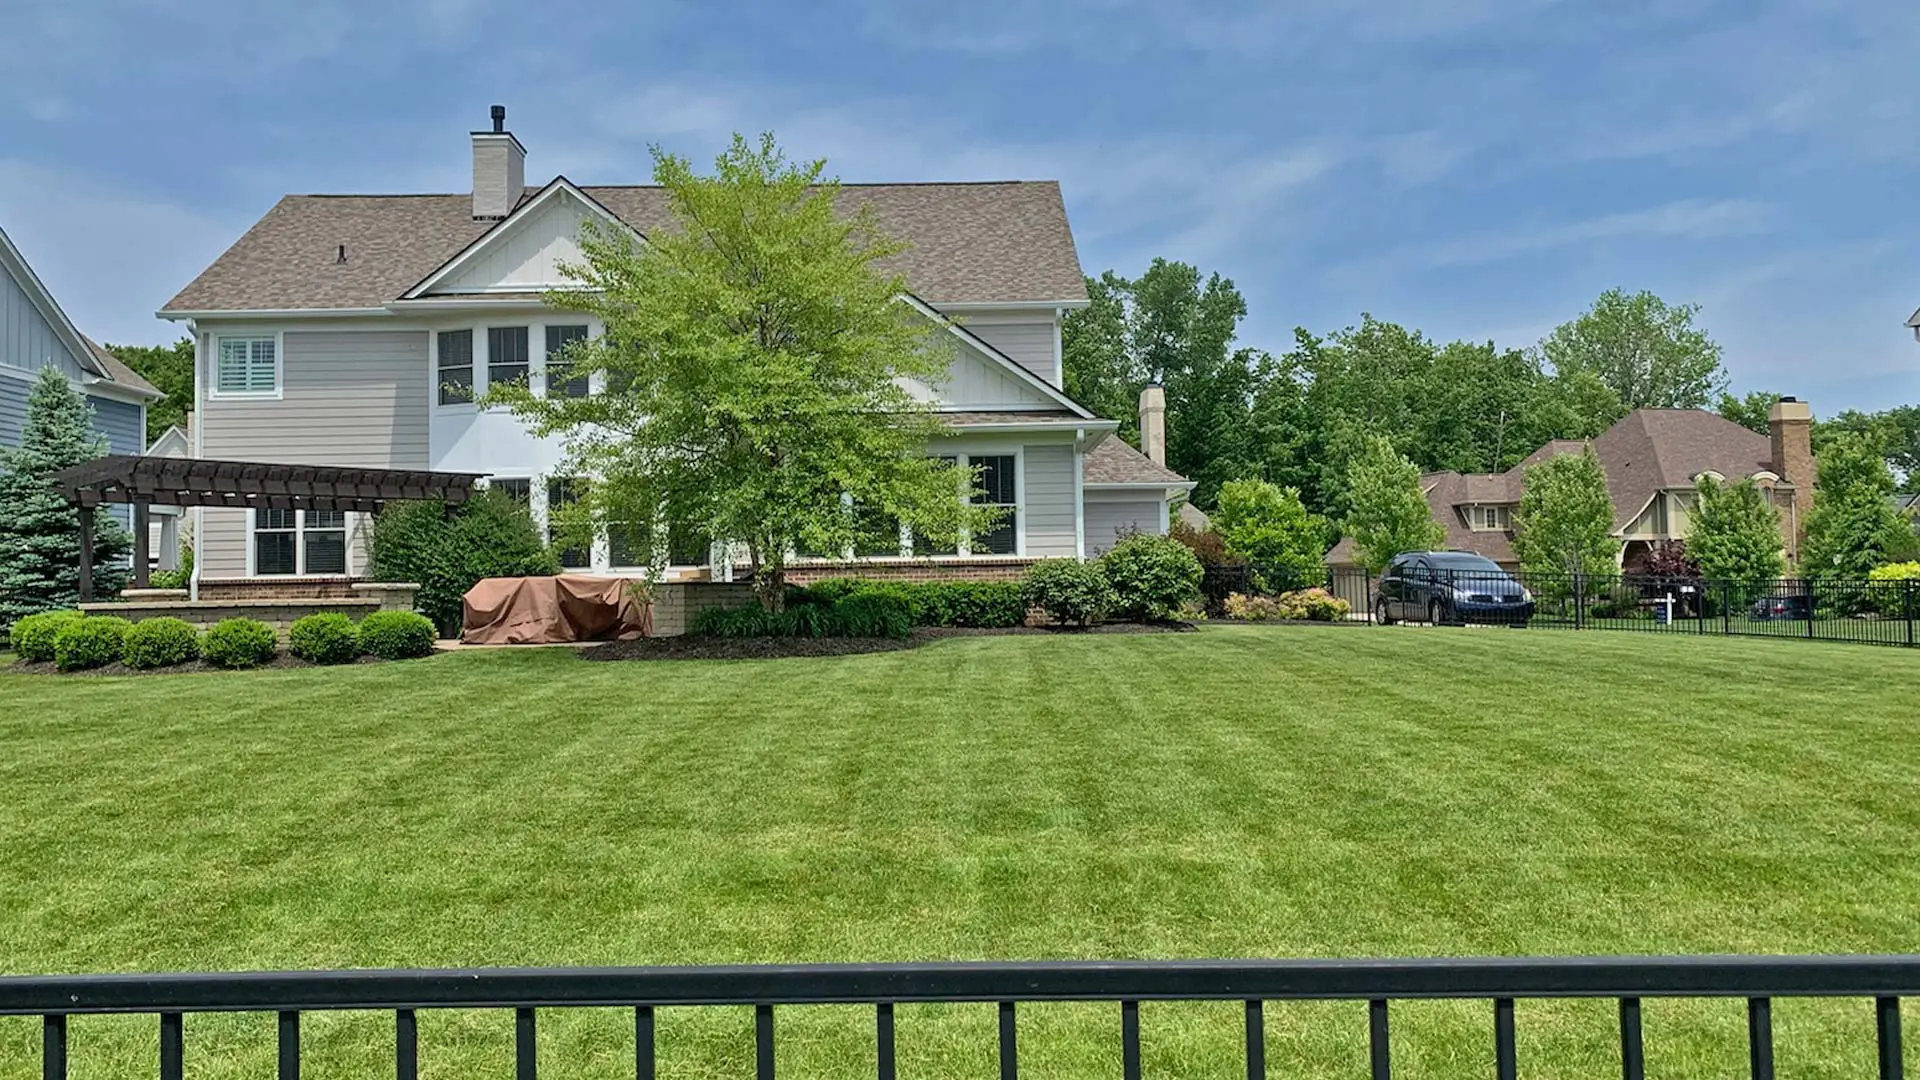 Freshly trimmed shrubs and well maintained lawn in Noblesville, IN.